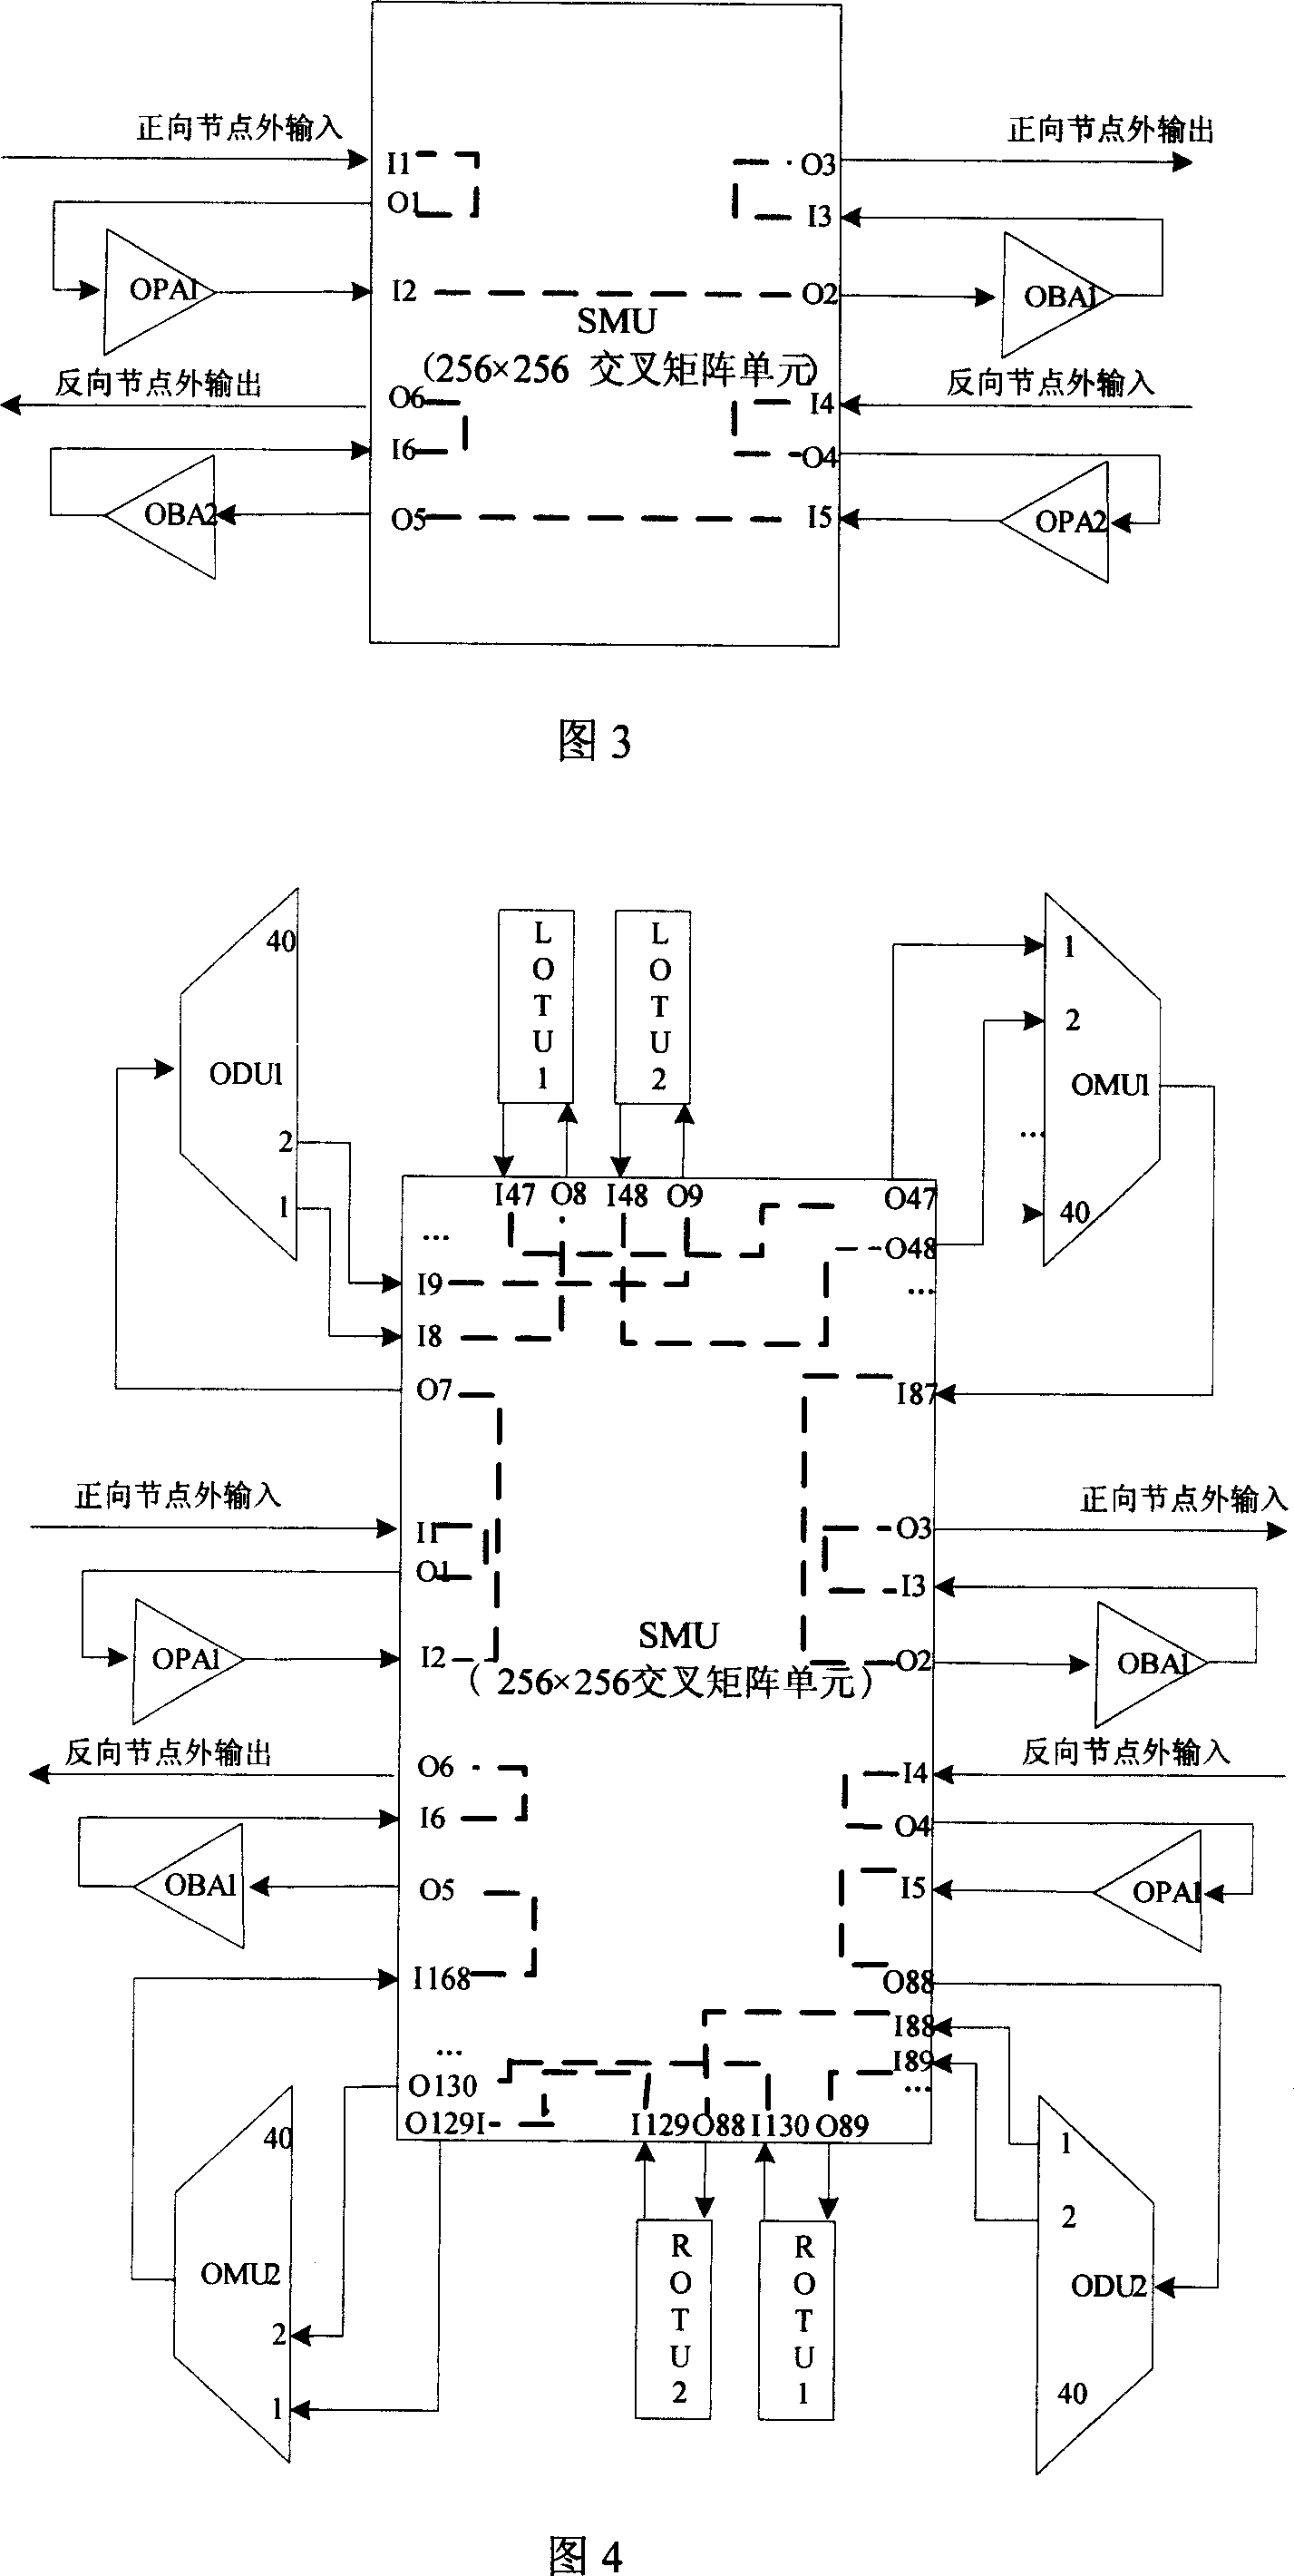 Apparatus and method for supporting automatic optical fiber connecting configuration of optical transmission equipment